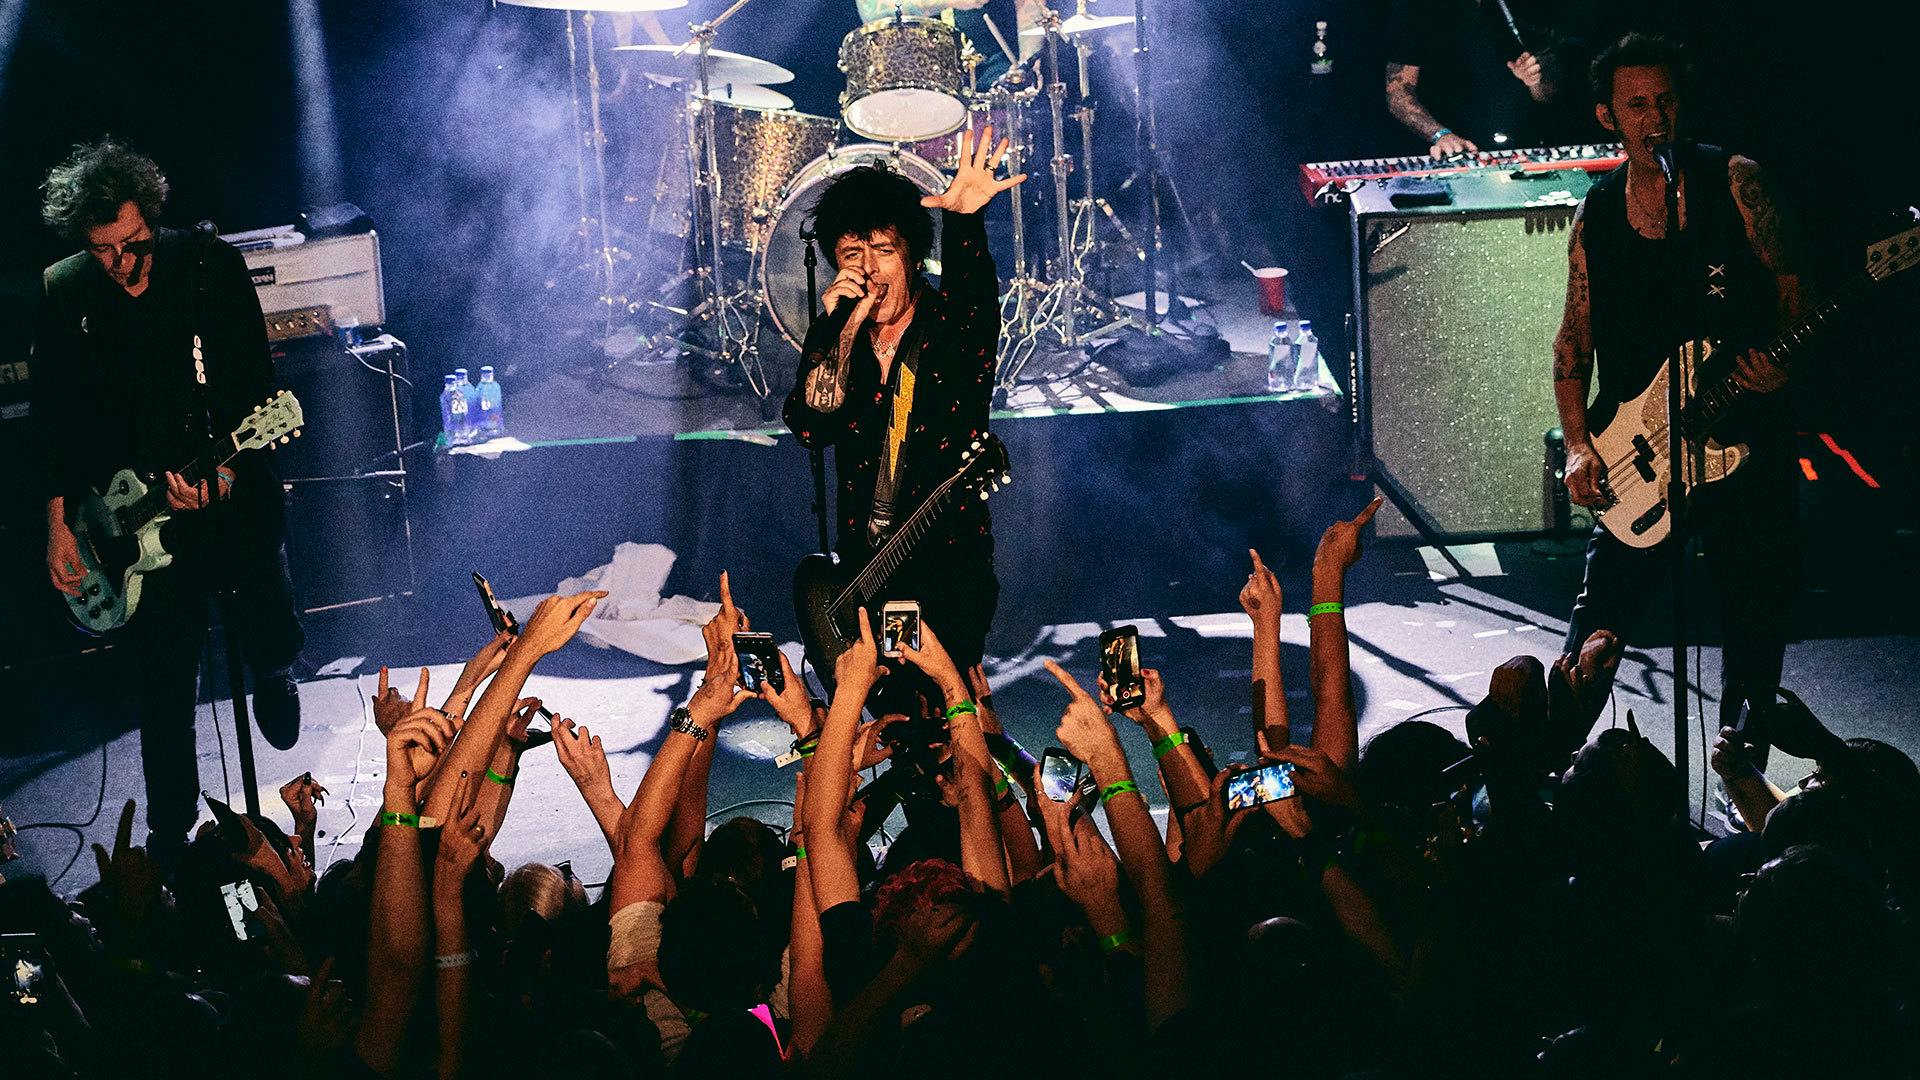 Green Day Played Dookie In Full Last Night – Here's The Set List